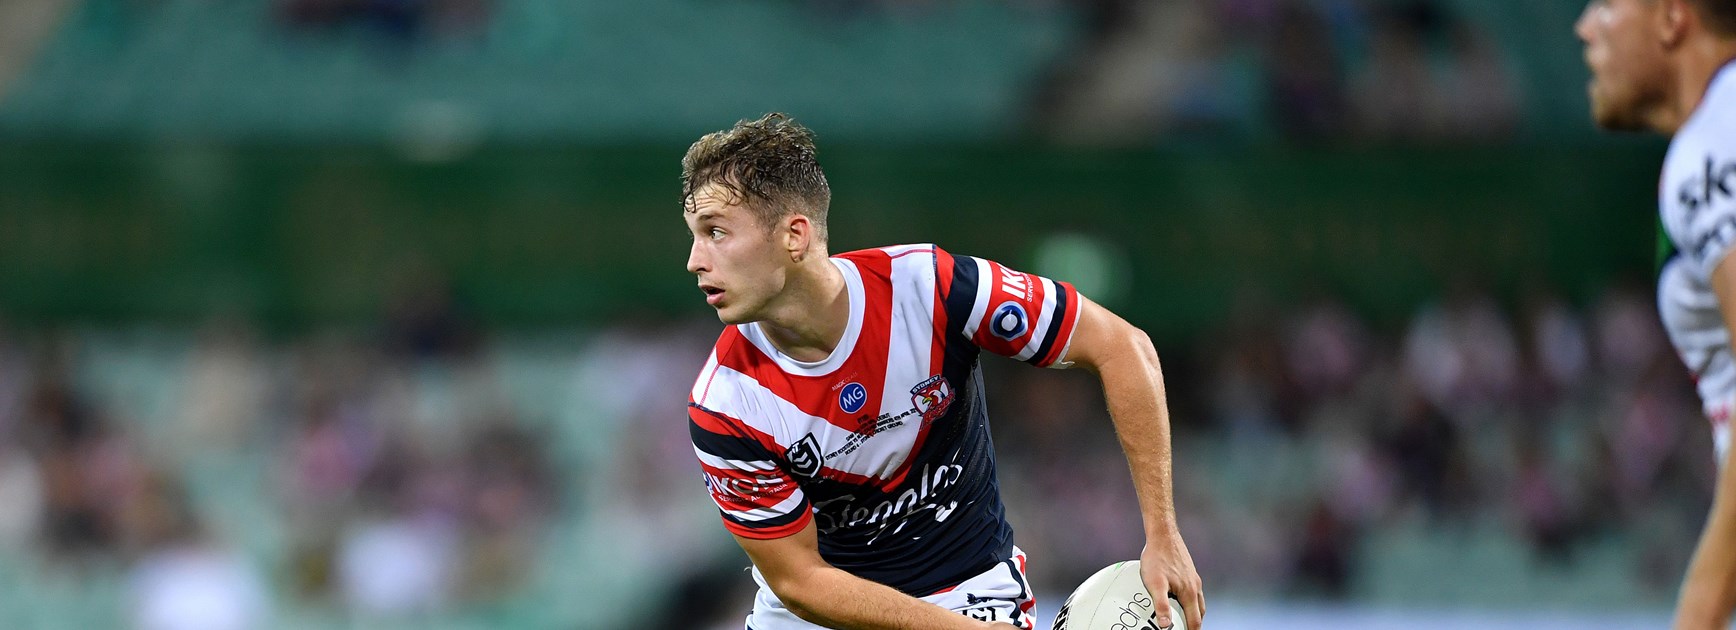 Sydney Roosters final team: Round 10 v Cowboys